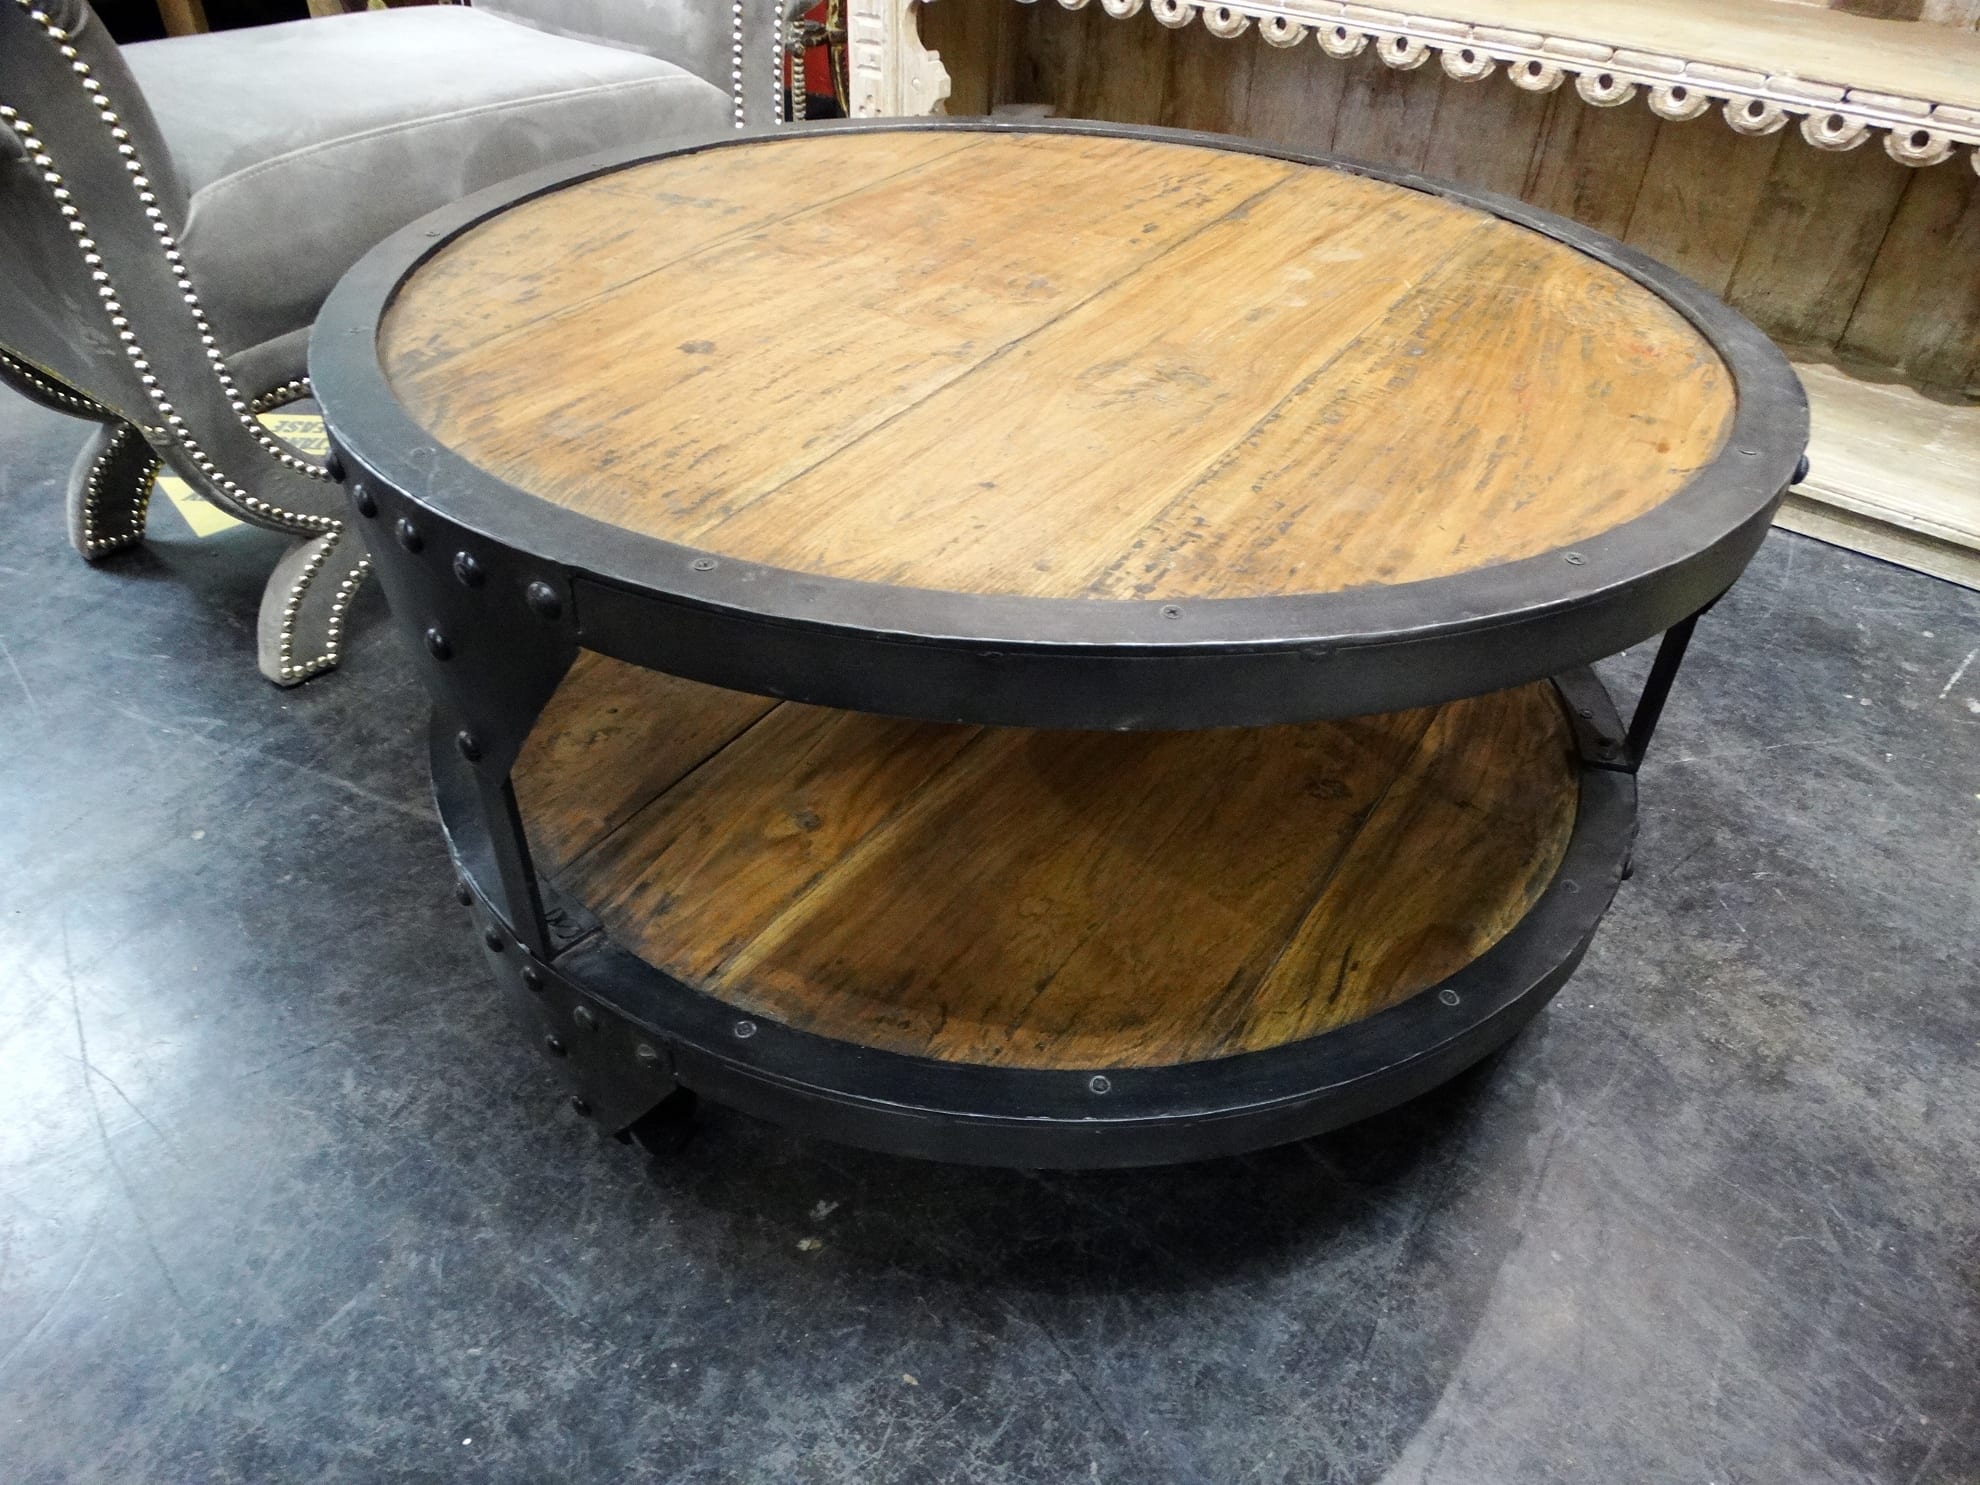 Details about   River Coffee Table Vintage Industrial Furniture Handmade Round Resin Glass Solid 